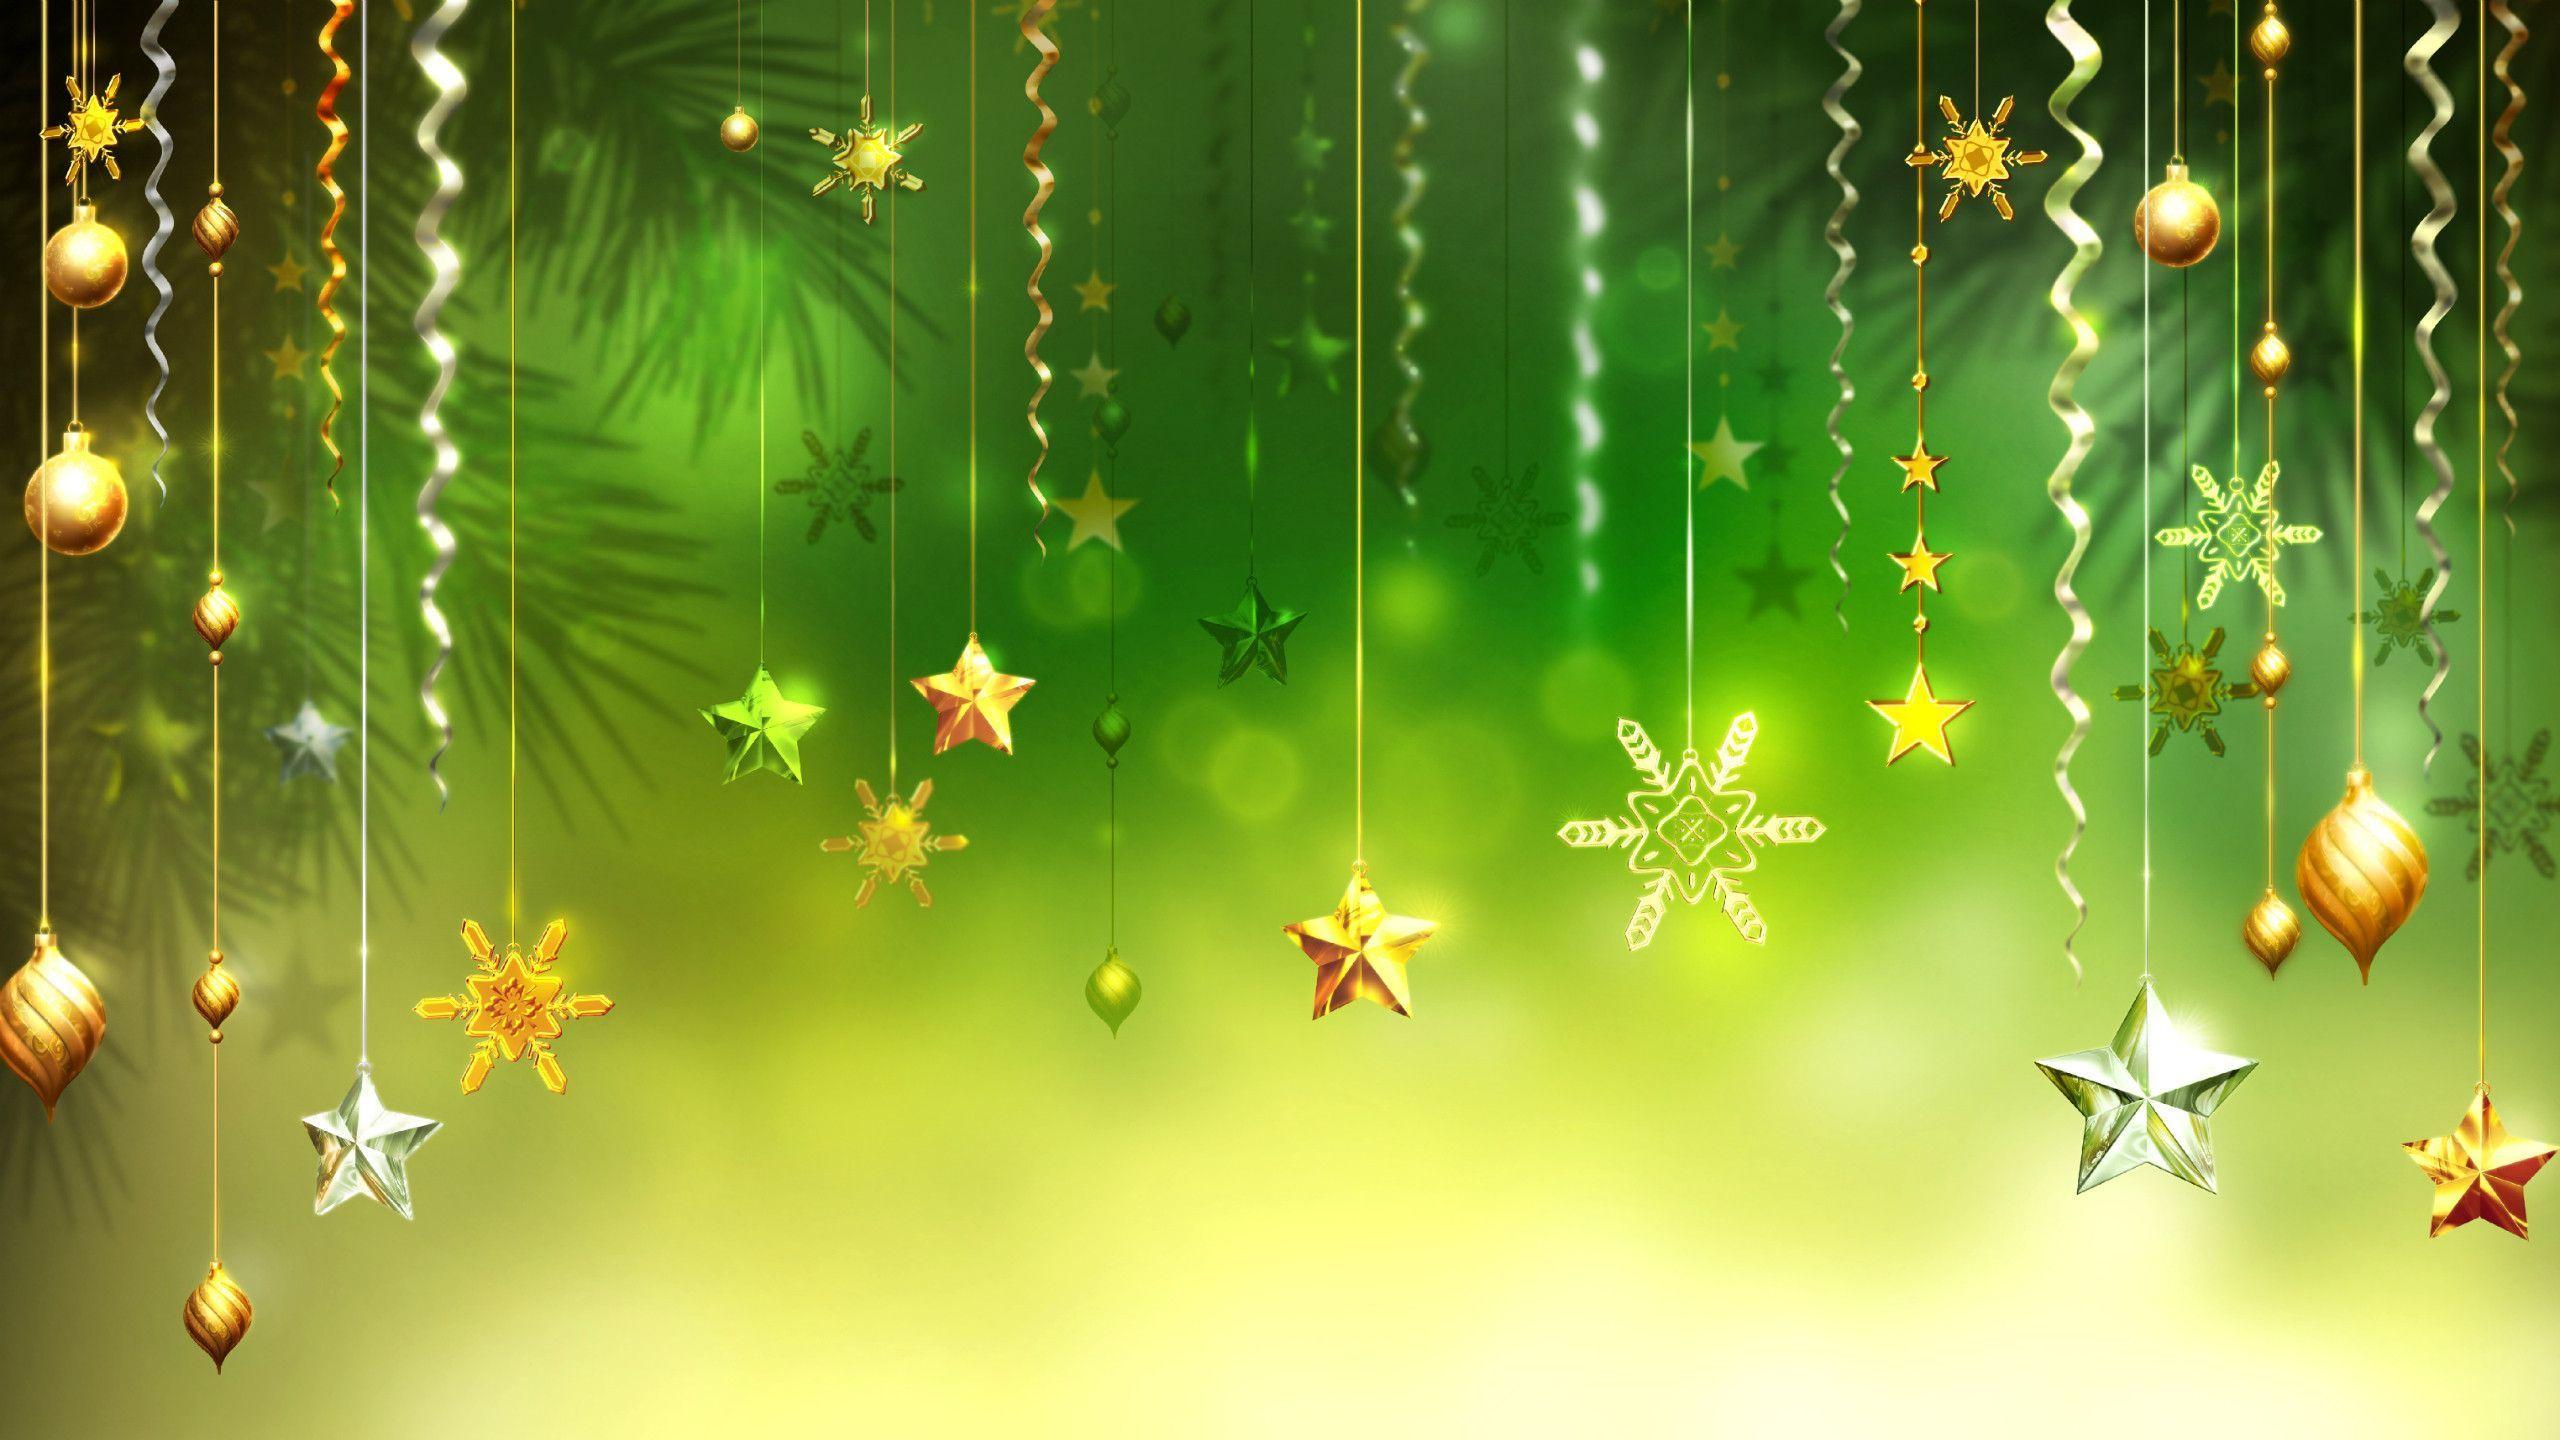 Christmas Wallpapers Image - Wallpaper Cave